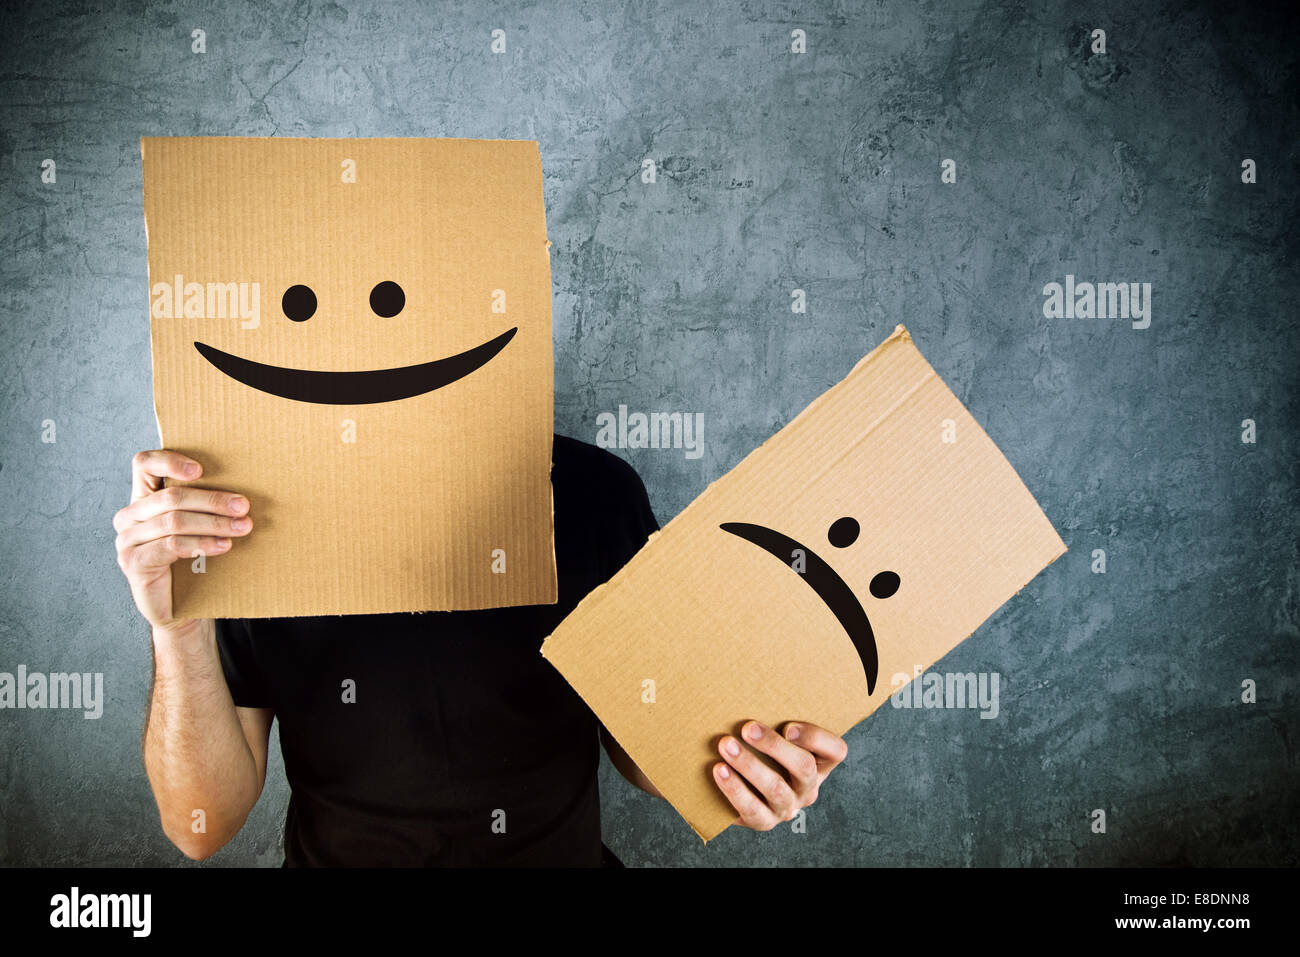 Man holding cardboard paper with happy smiley face printed on. Happiness and joy concept. Stock Photo